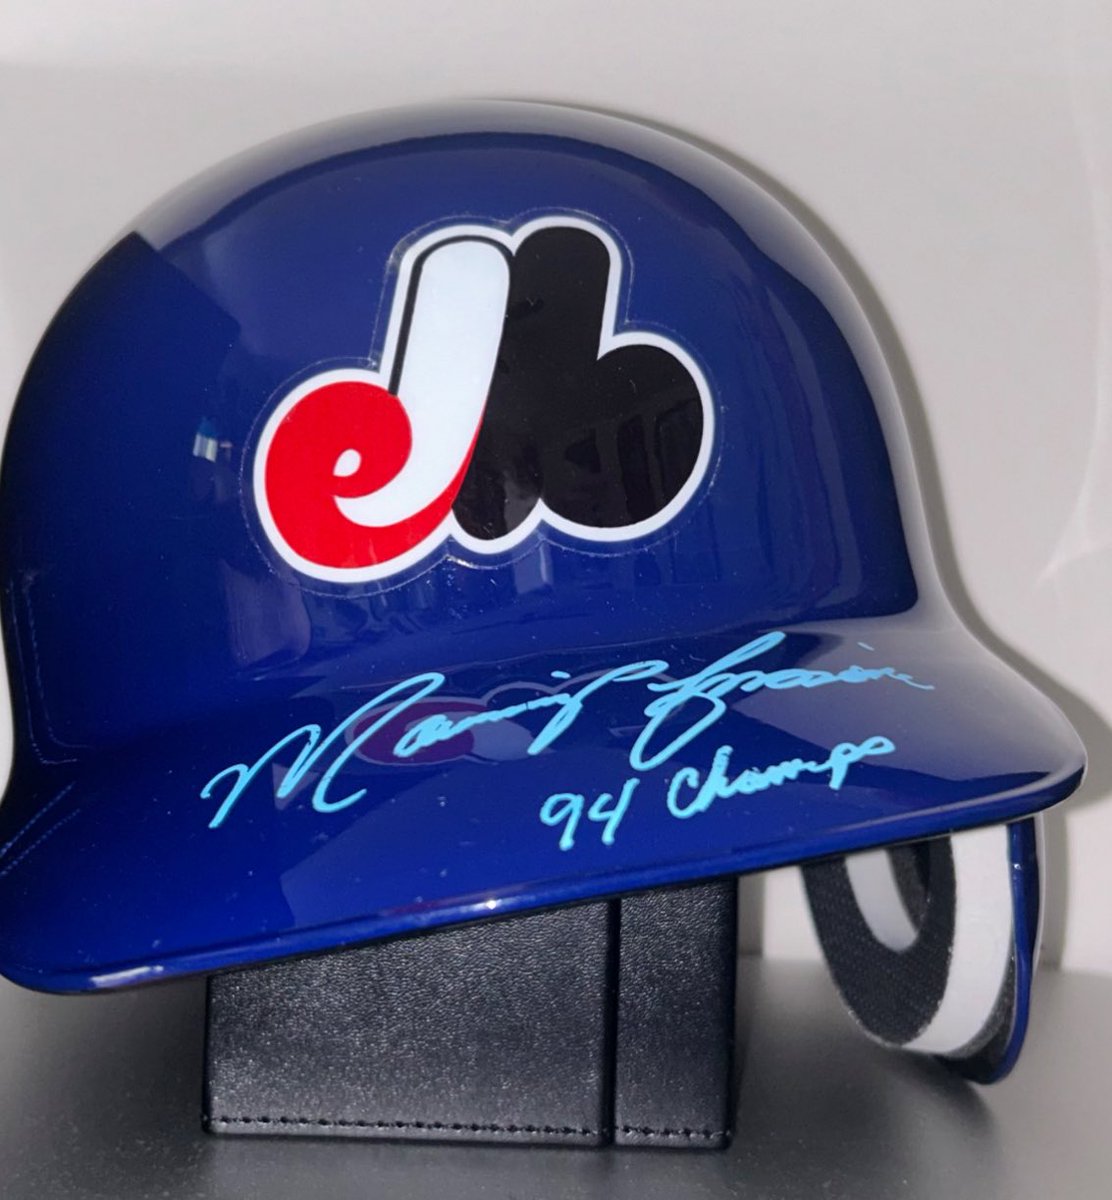 Have you placed your bid on Felipe’s jacket, Urbina’s jersey, or Grip’s helmet? Just a few of the items up for grabs in the @ExposFest auction! Bidding is on NOW. encanpro.ca/auctions/expos…